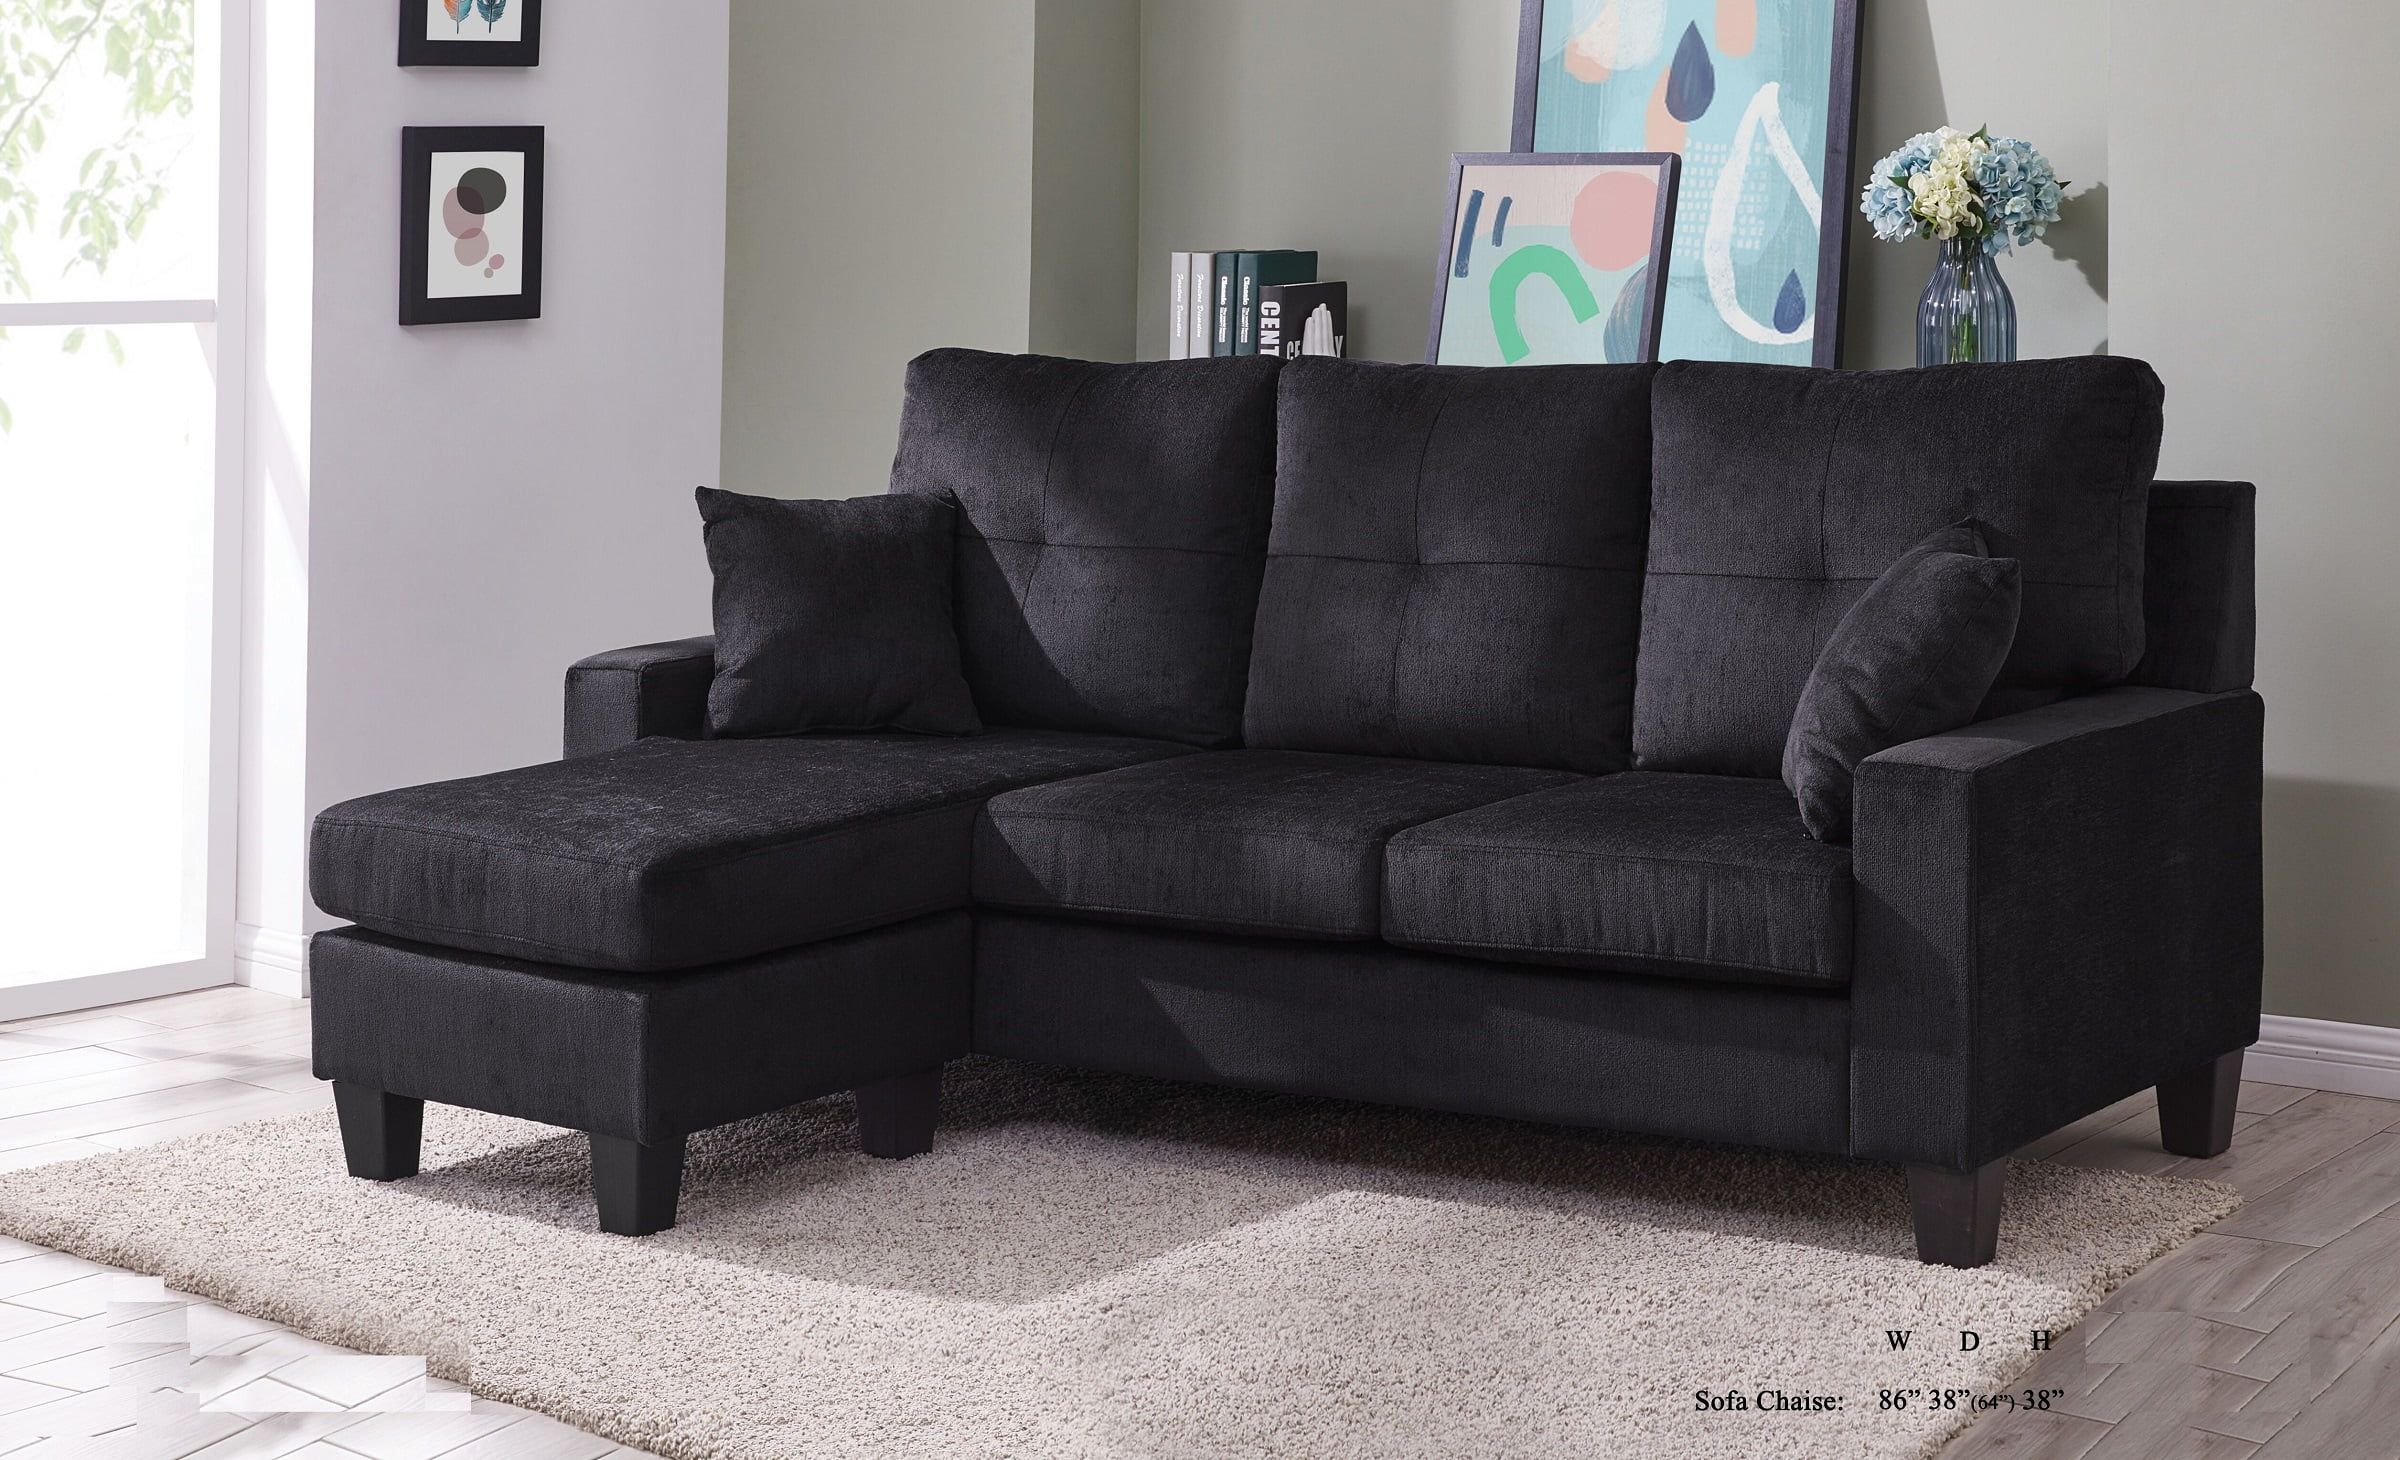 Sectional Sofa Set Black Fabric Tufted Cushion Sofa Chaise Small Space Pertaining To Sofas For Compact Living (View 13 of 20)